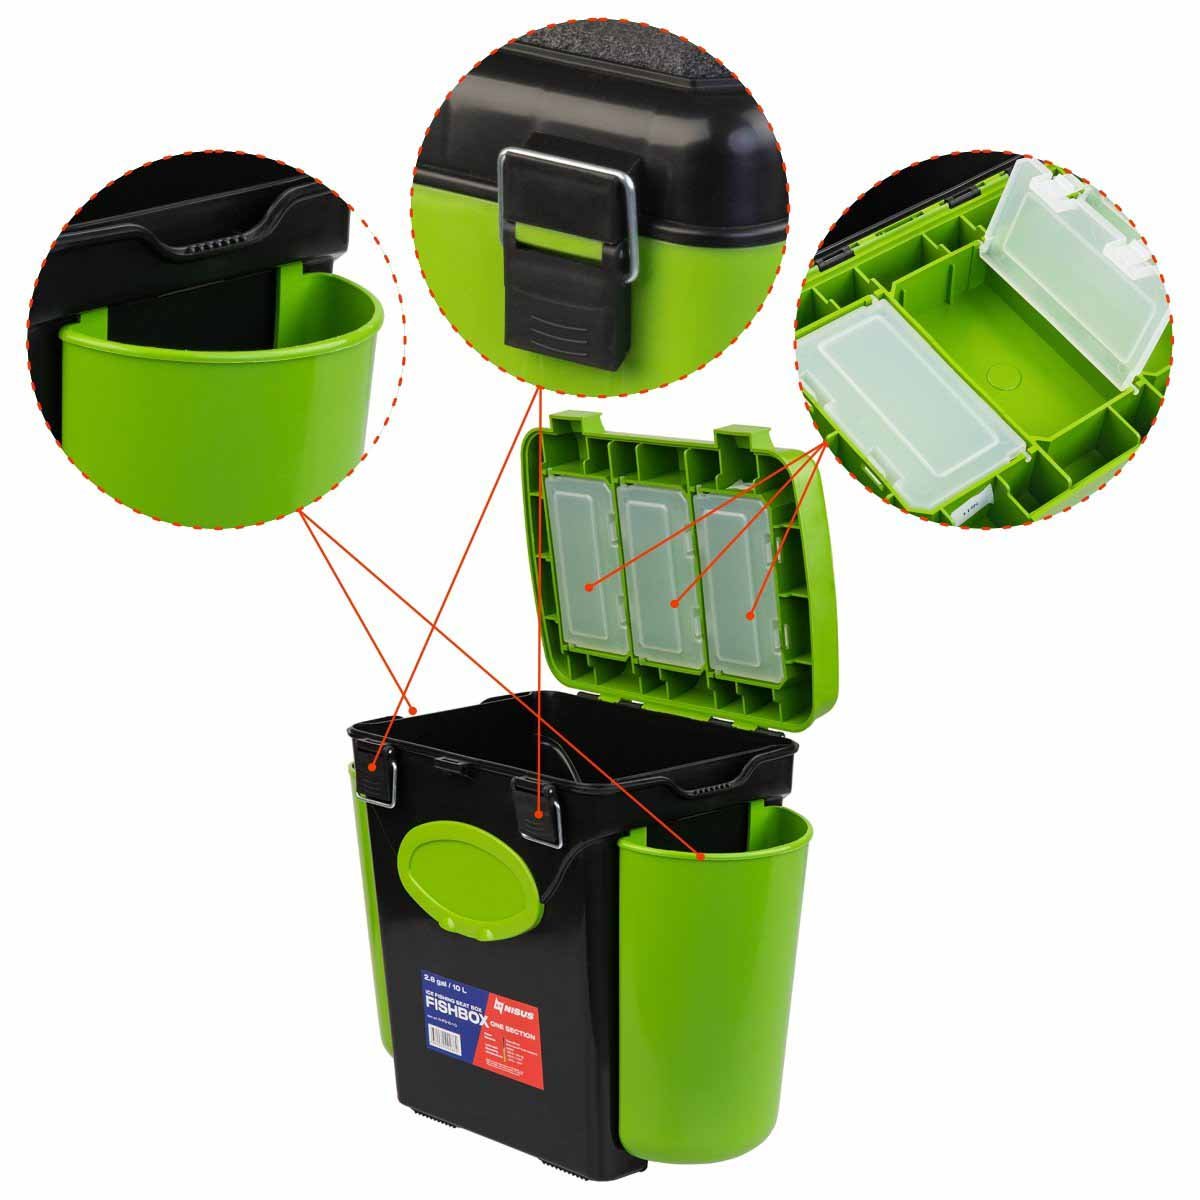 FishBox 10 liter Box for Ice Fishing is equipped with 2 plastic side pockets and 3 plastic boxes for handy storage.